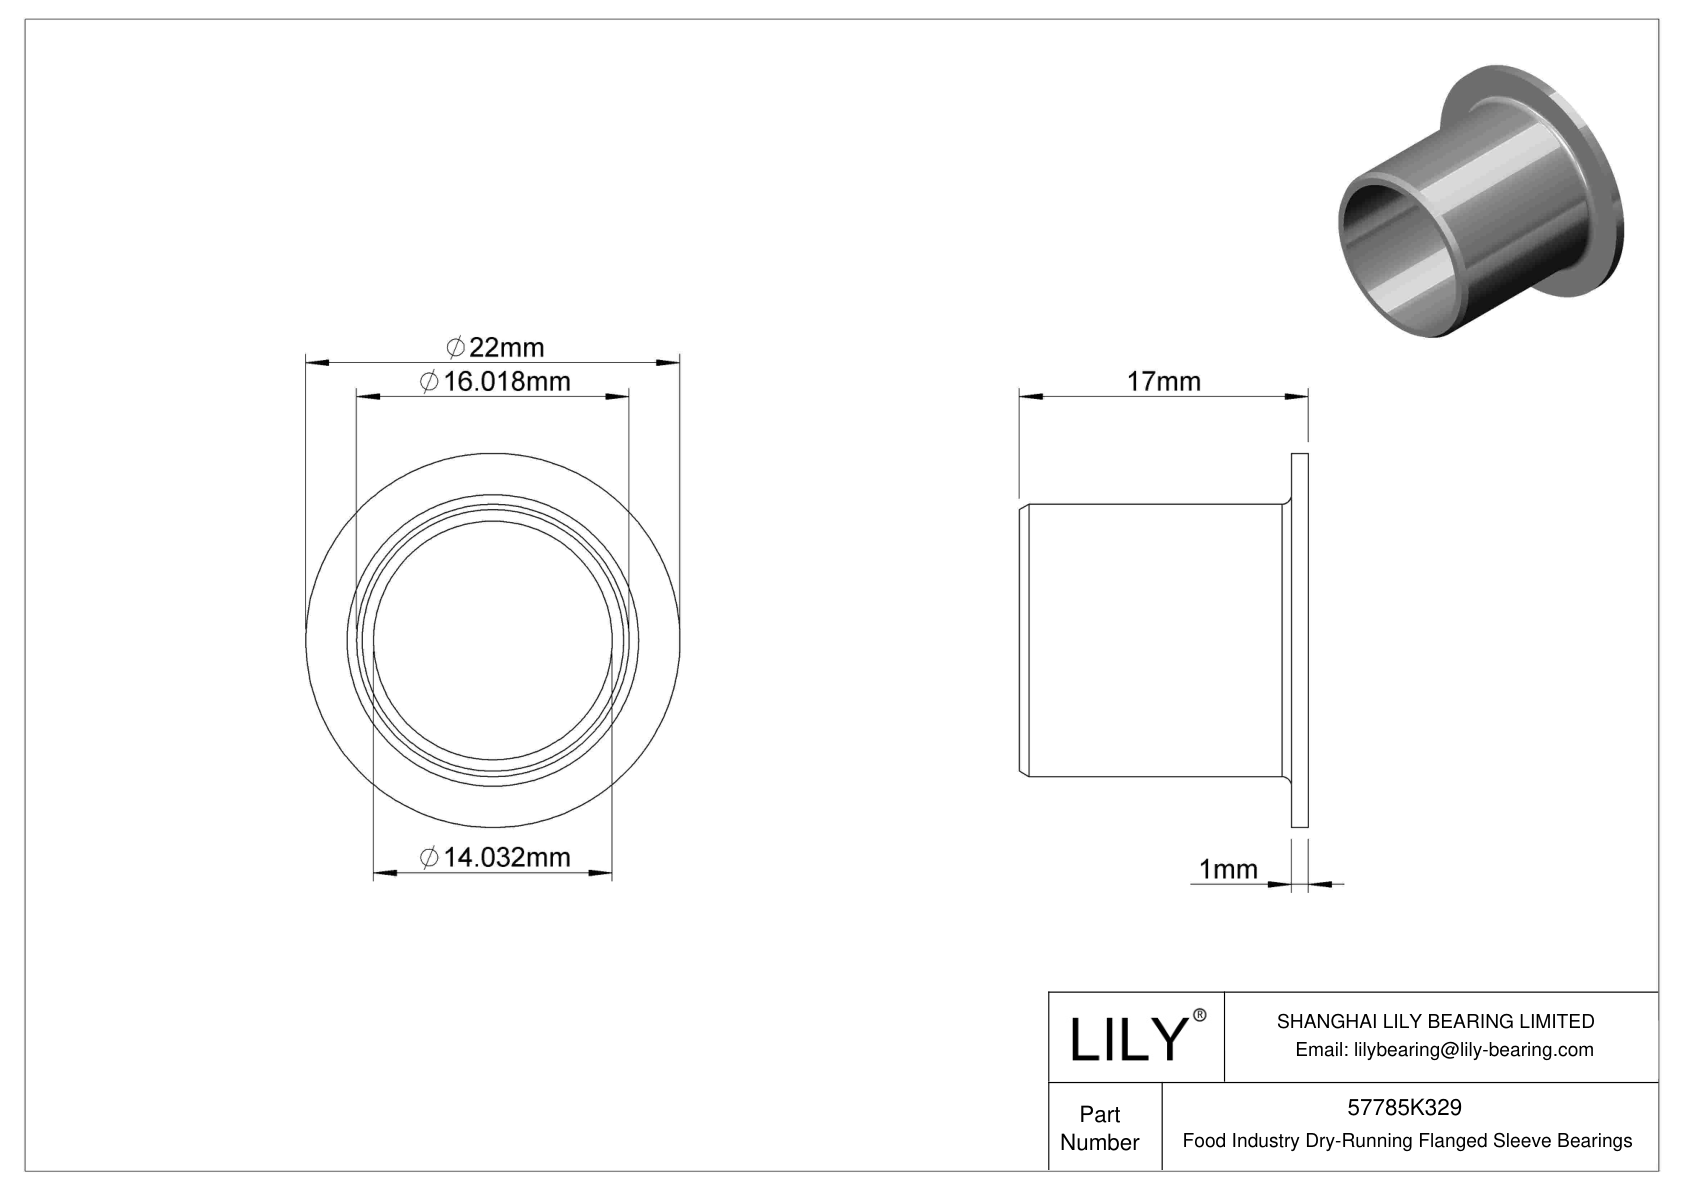 FHHIFKDCJ Food Industry Dry-Running Flanged Sleeve Bearings cad drawing